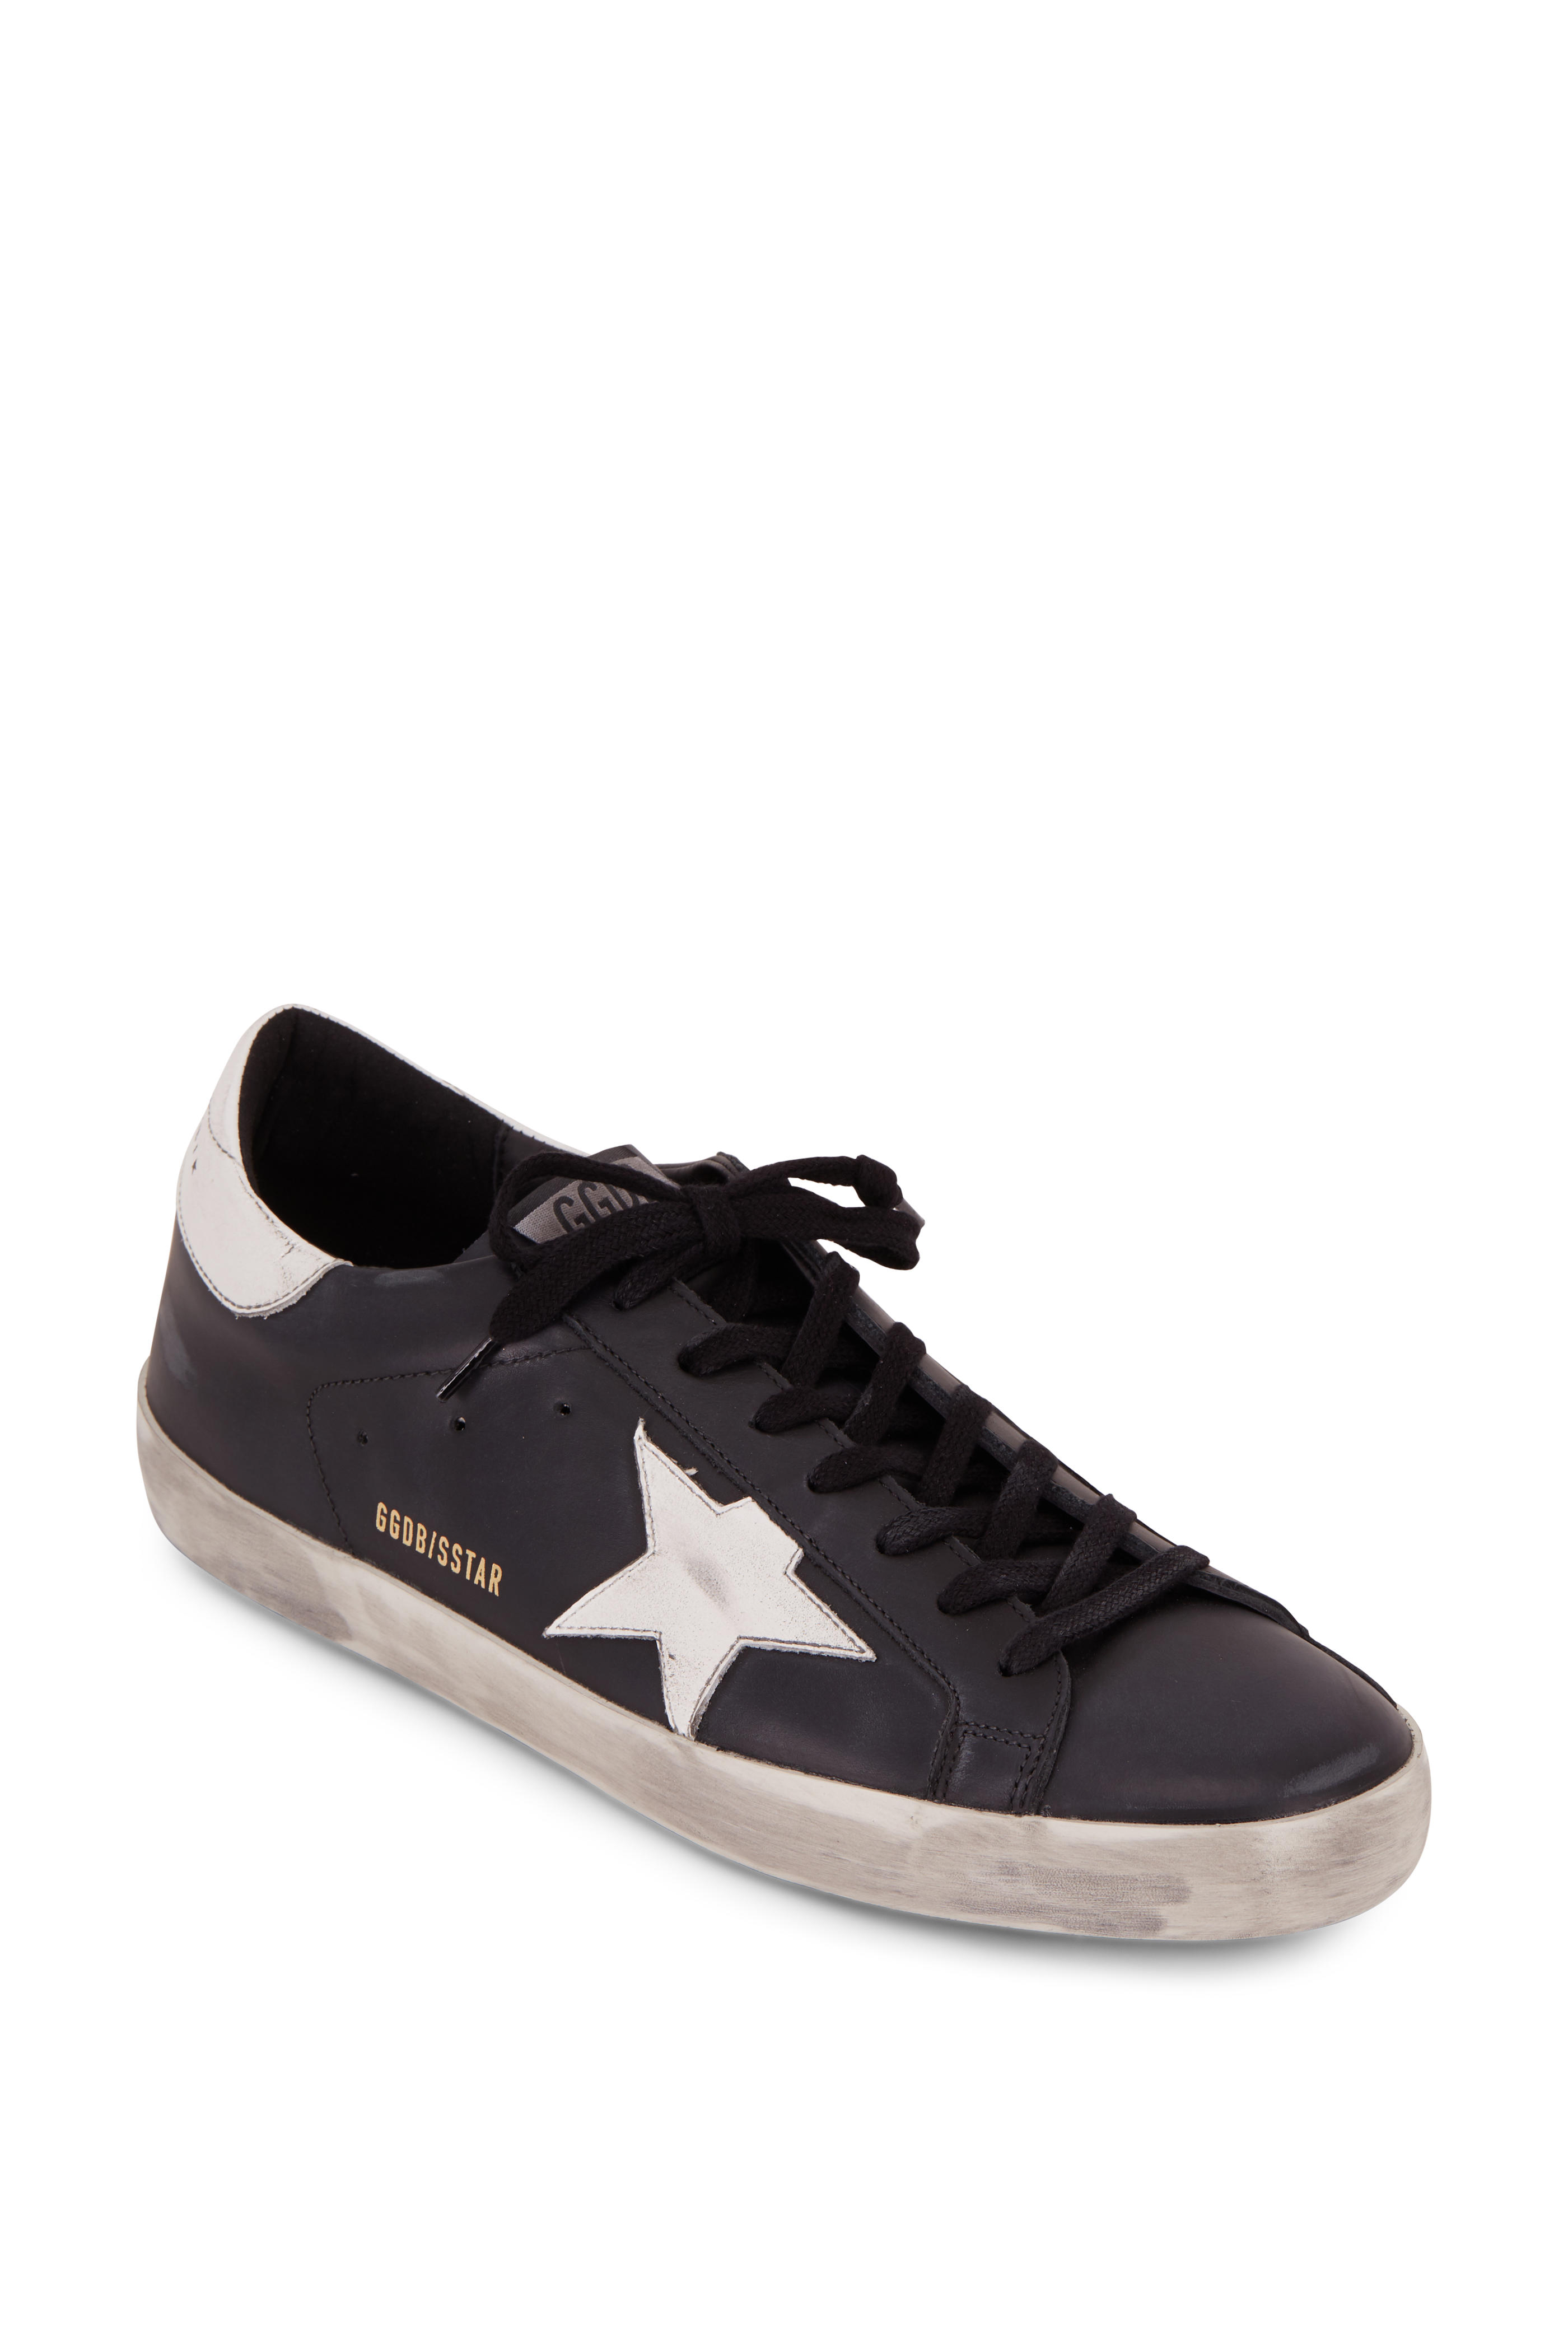 golden goose black leather sneakers